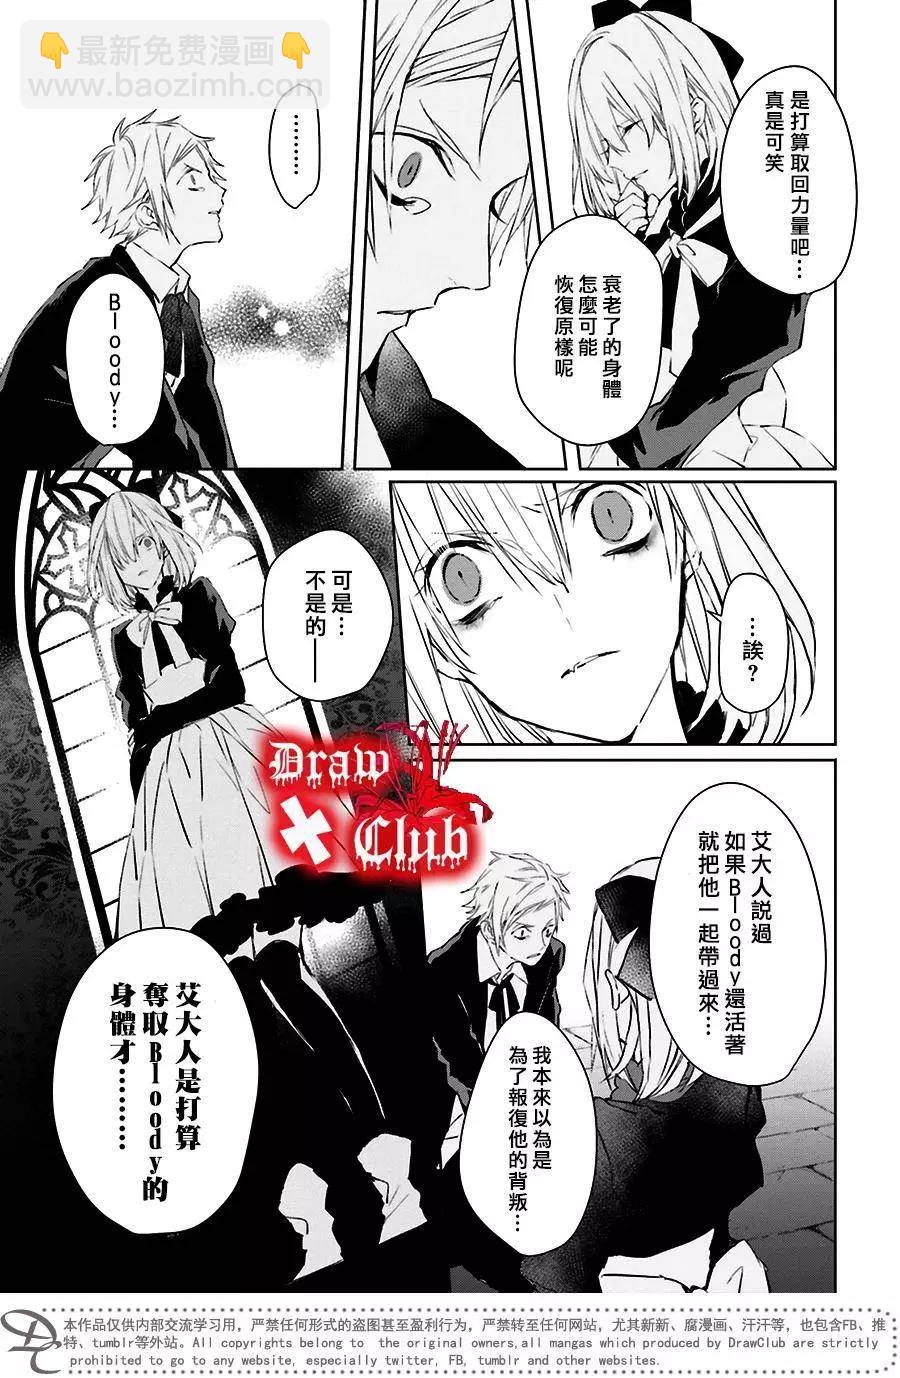 Bloody Mary - 第33回 - 4